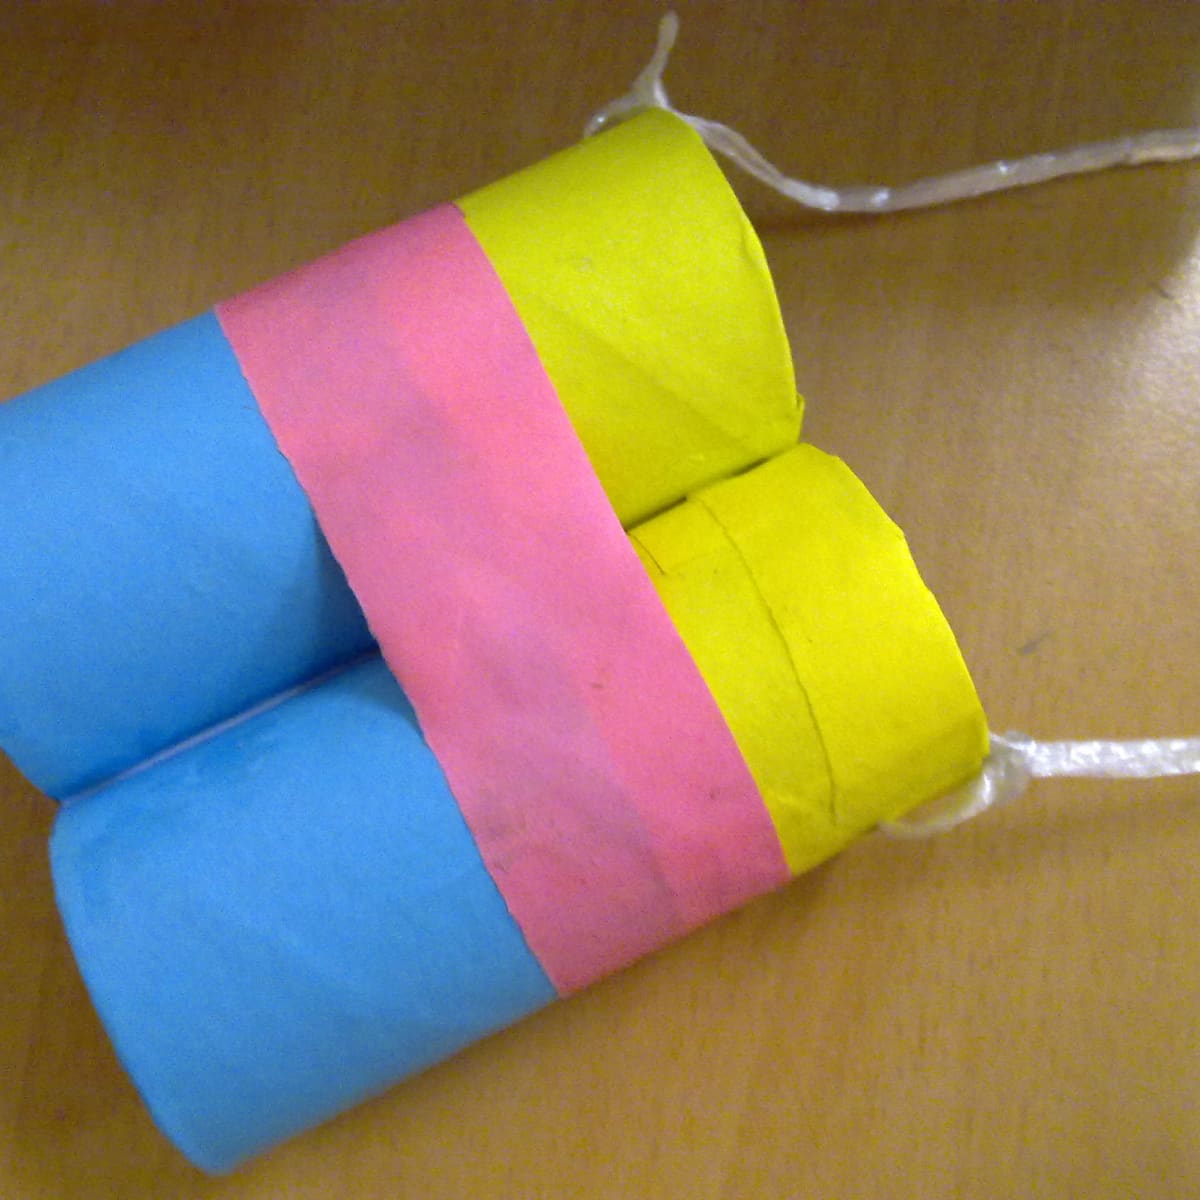 Toilet Paper Roll Crafts {Easy Craft Ideas with Toilet Paper Rolls